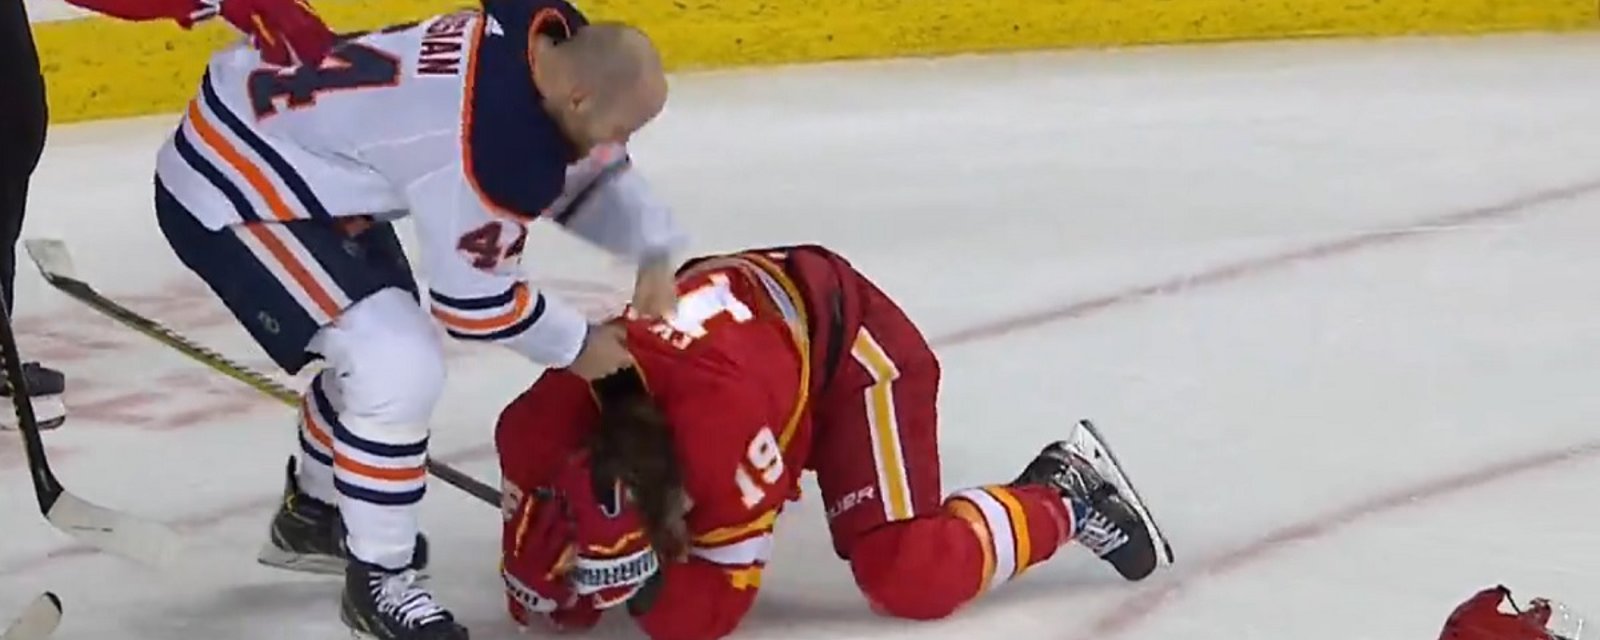 Zack Kassian ejected after snapping and ragdolling Matthew Tkachuk.